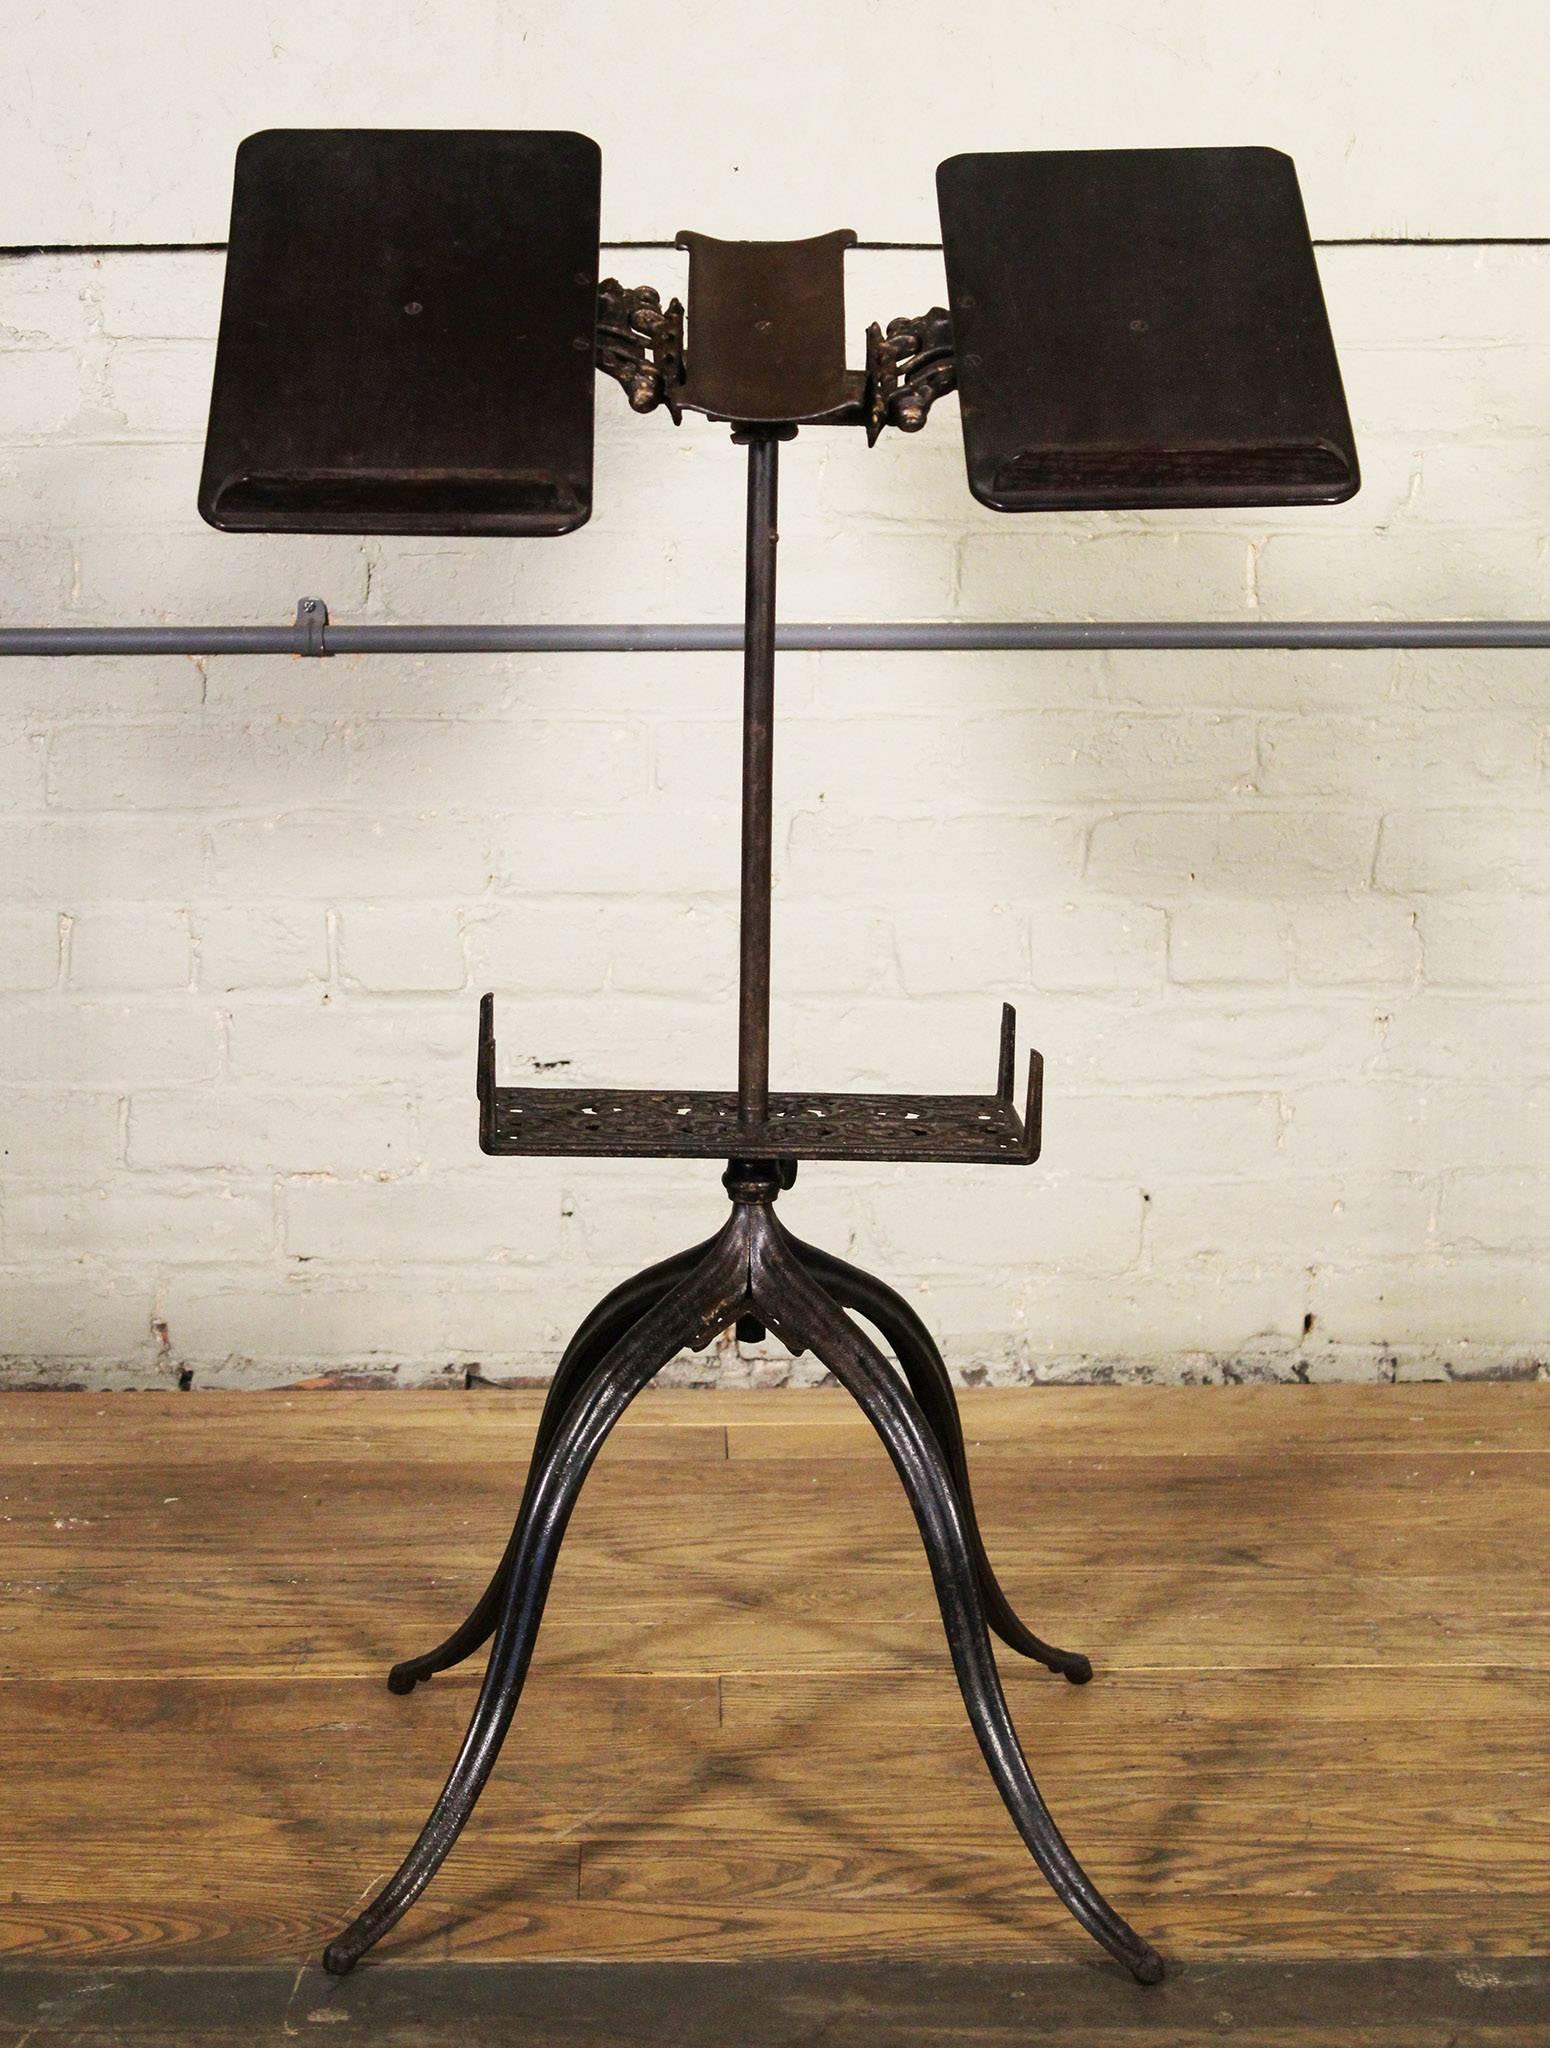 Vintage antique ornate cast iron adjustable bible, dictionary, book stand, table. Early 1900s. The top supports can be adjusted to various angles, and they can be snapped closed to securely hold a book, etc. Measures: Height is adjustable from